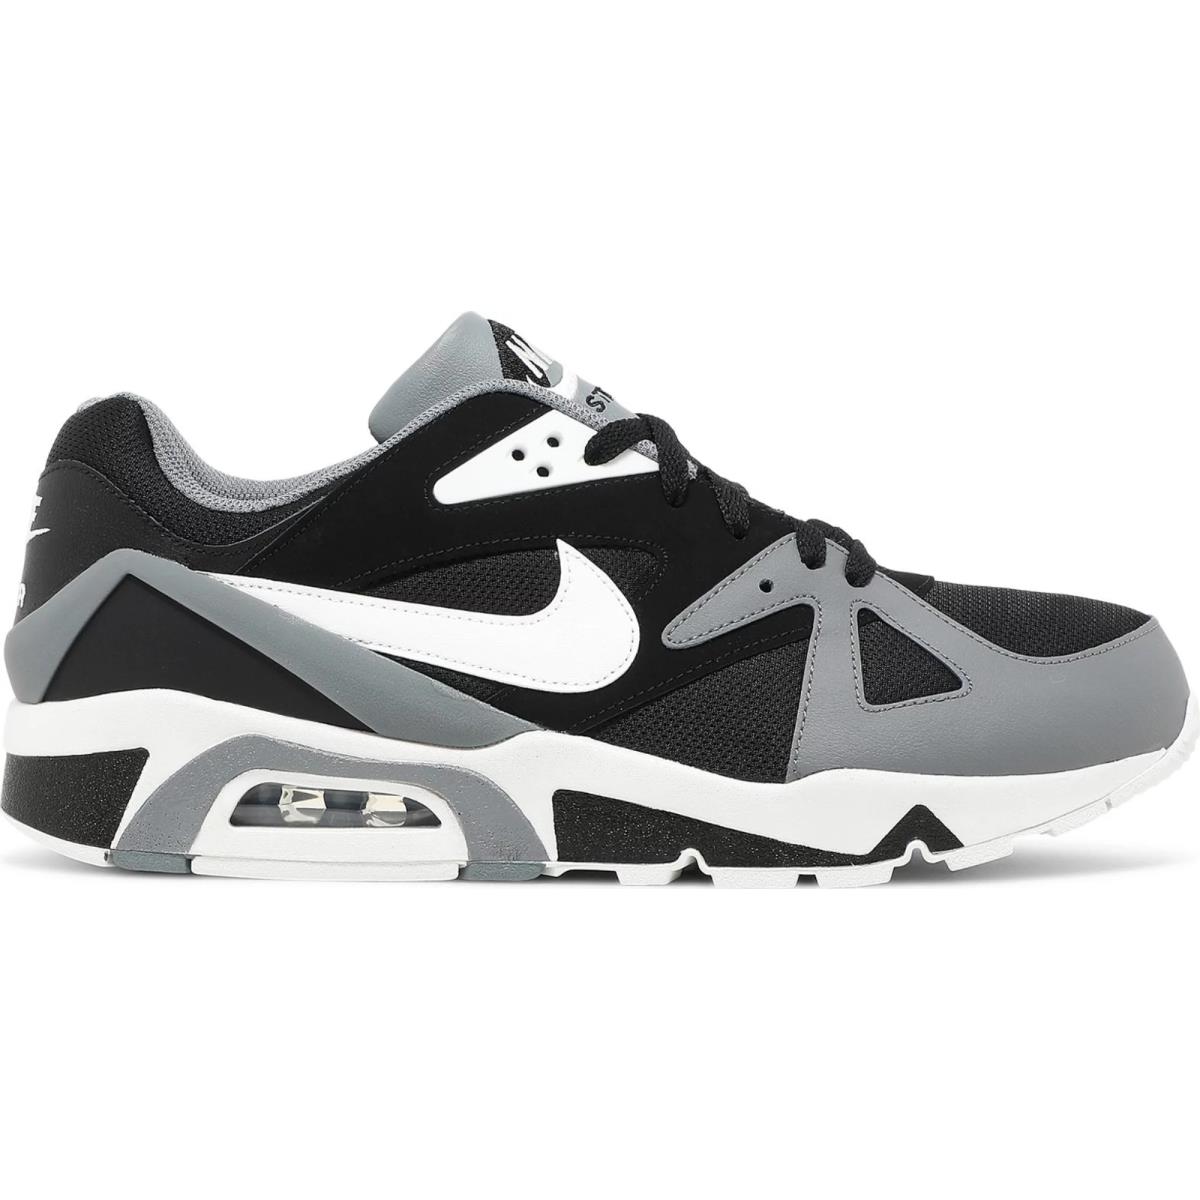 Nike Air Structure Black Smoke Grey White Sneakers Shoes DB1549-001 Multi Size